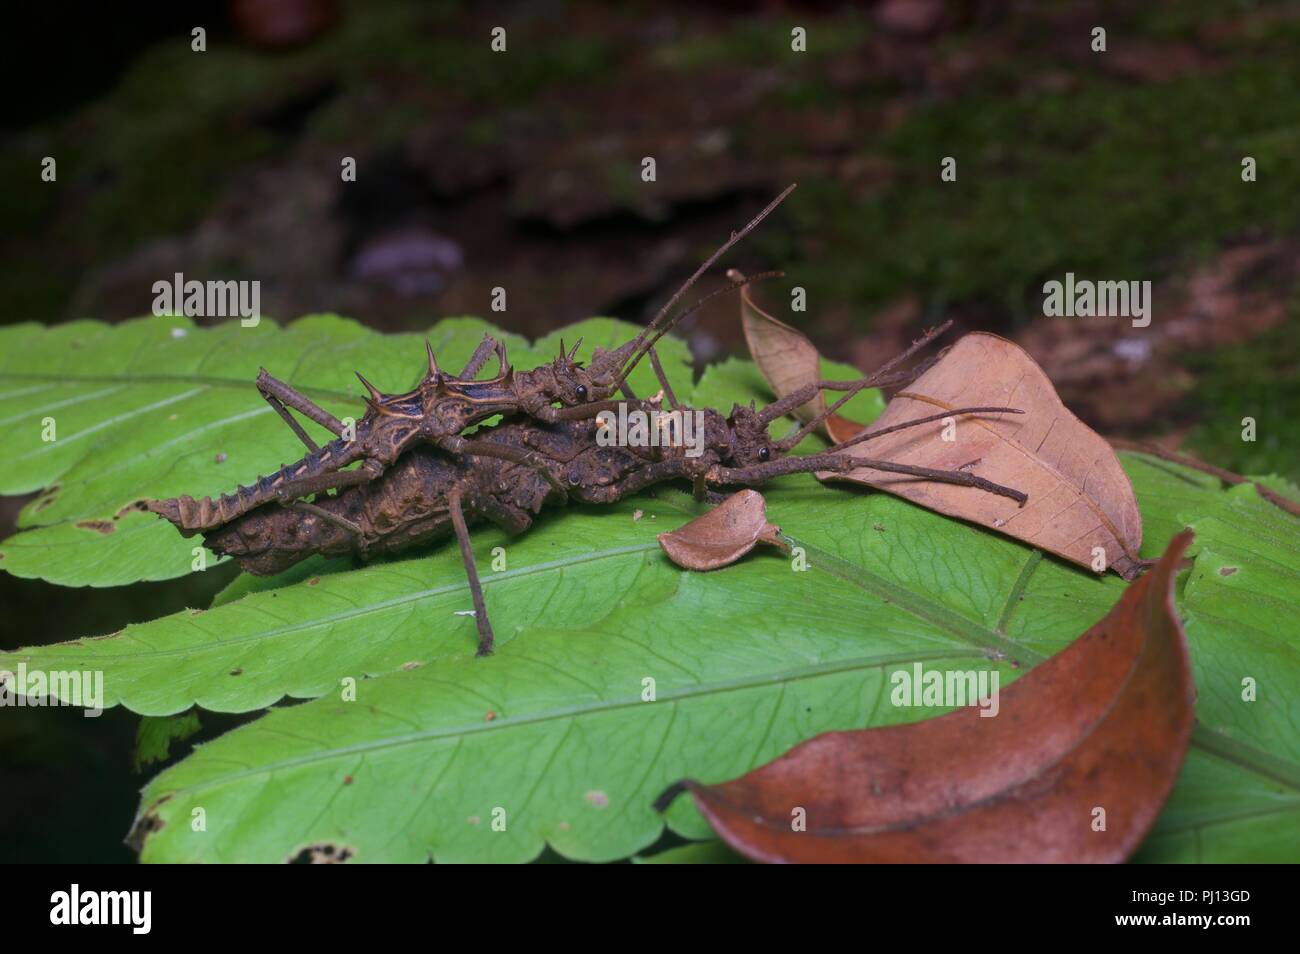 A mating pair of stick insects (phasmids) on a rainforest leaf at night in Kubah National Park, Sarawak, East Malaysia, Borneo. Stock Photo